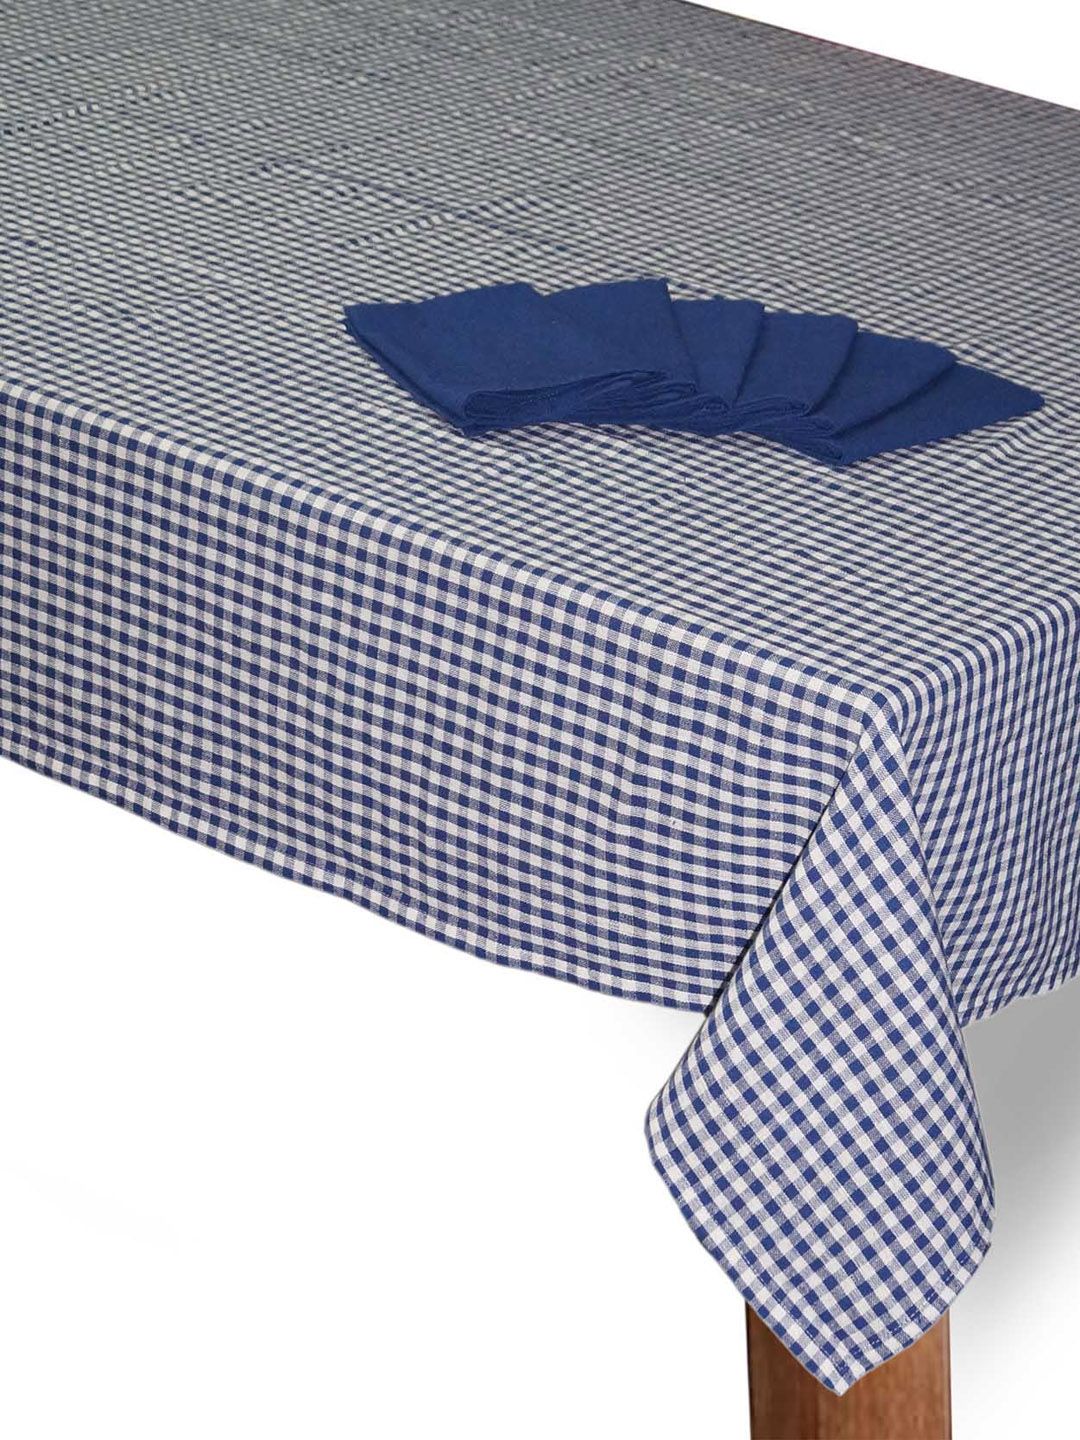 Lushomes Blue & White Cotton 6 Seater Table Cover with Table Napkins Price in India